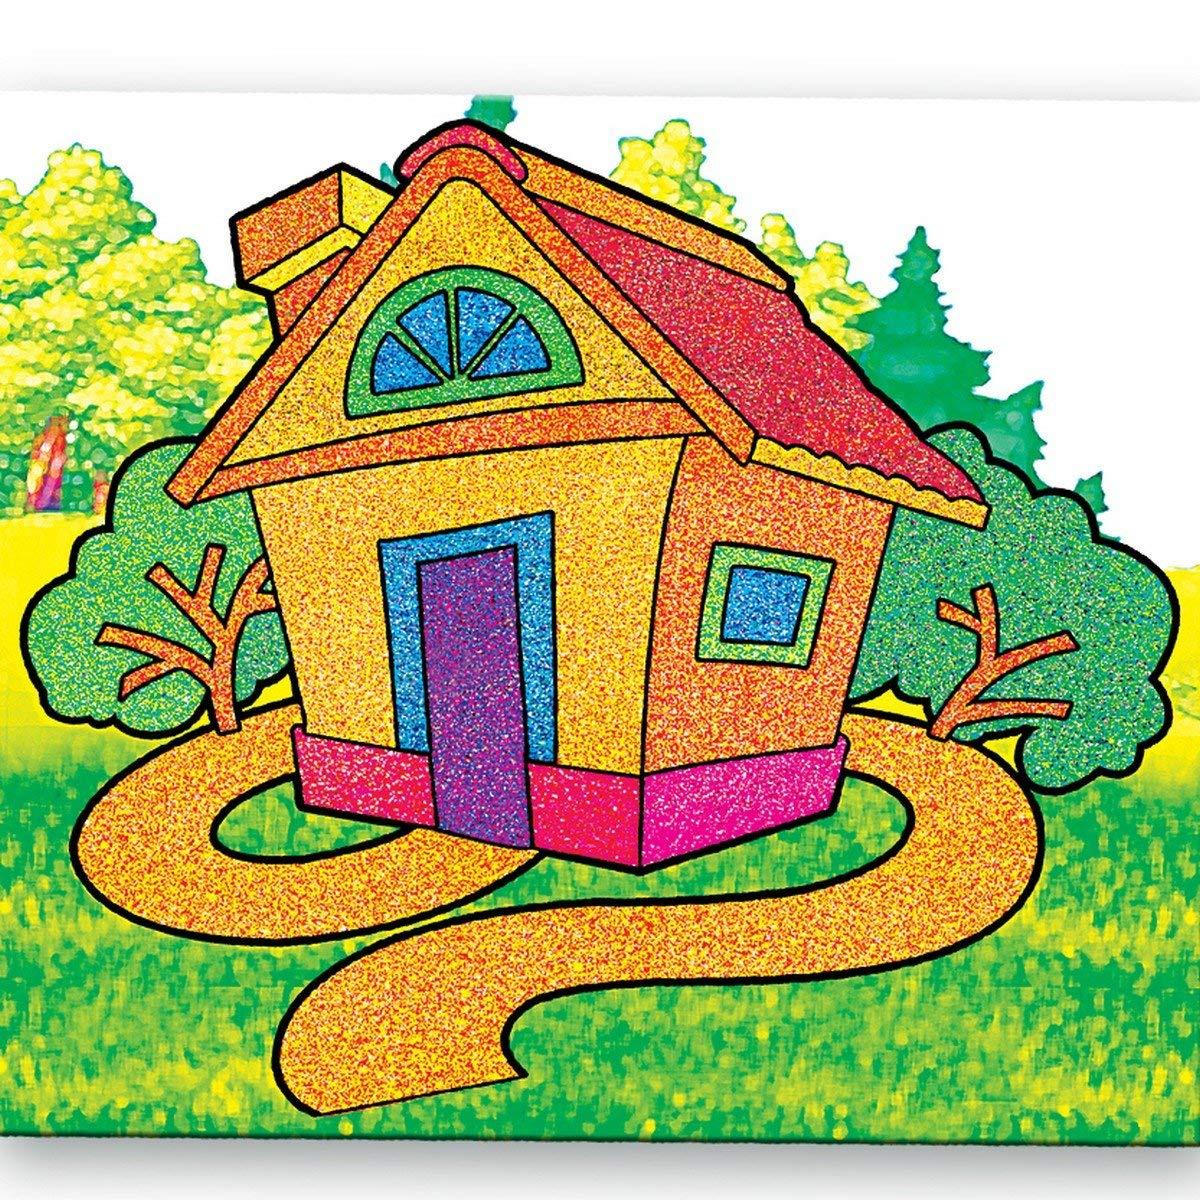 ToyKraft Sand Art Pictures Fantasy Houses, Activity Toy